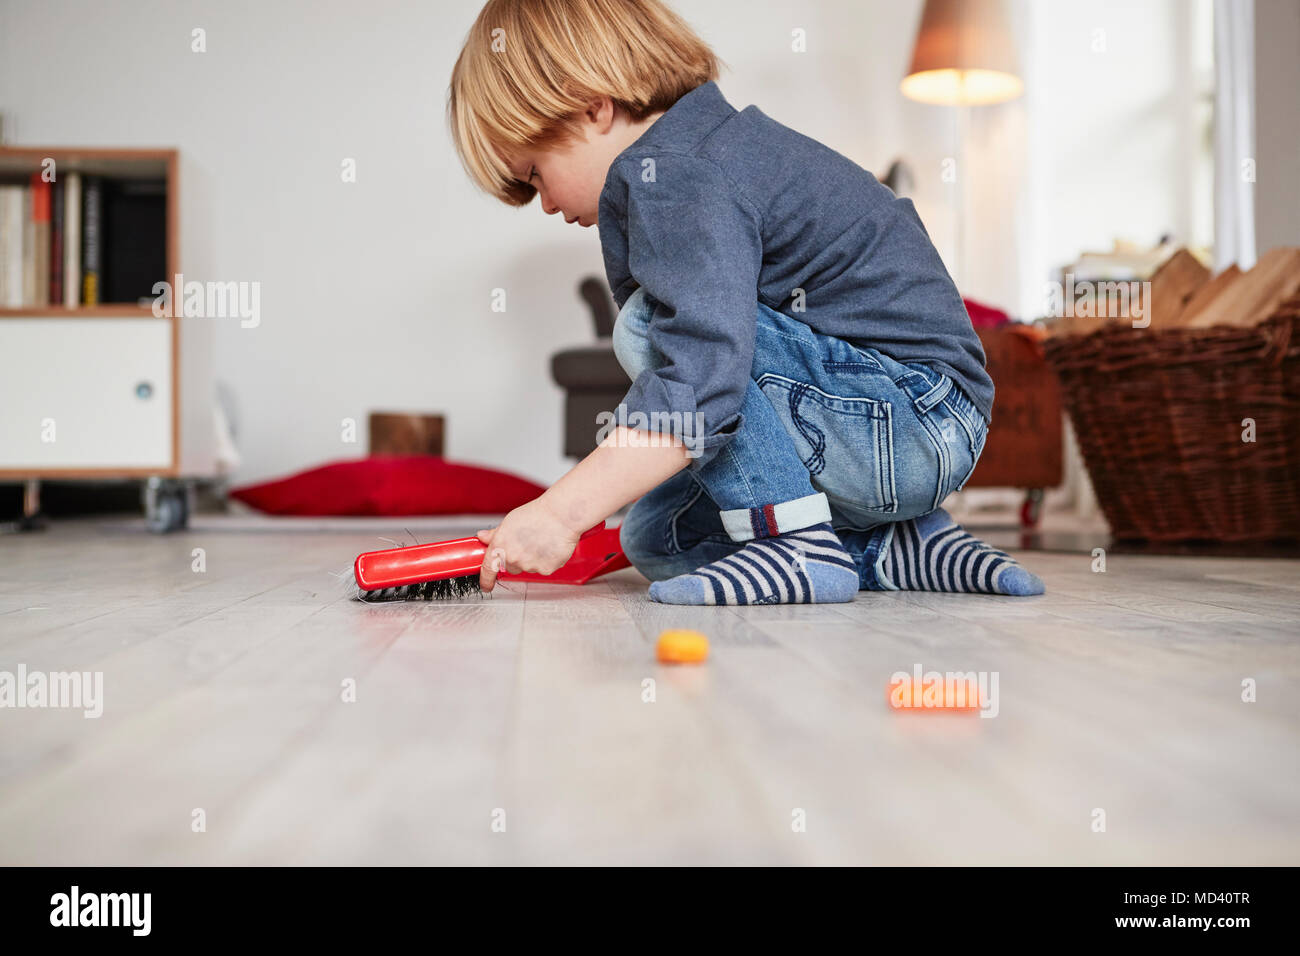 Young boy playing with toy dustpan and brush Stock Photo